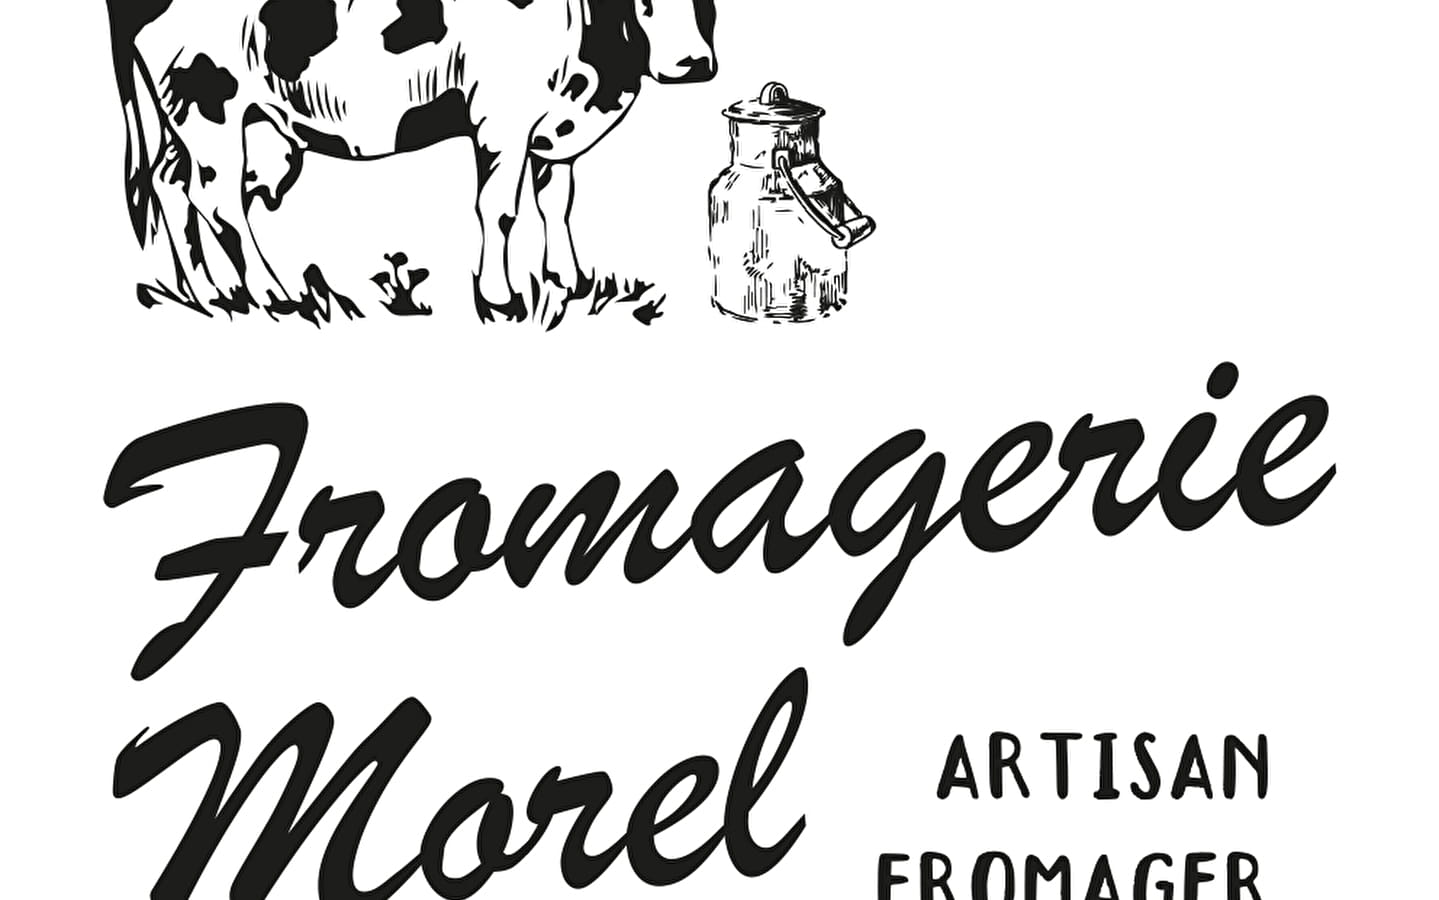 SARL Fromagerie Morel